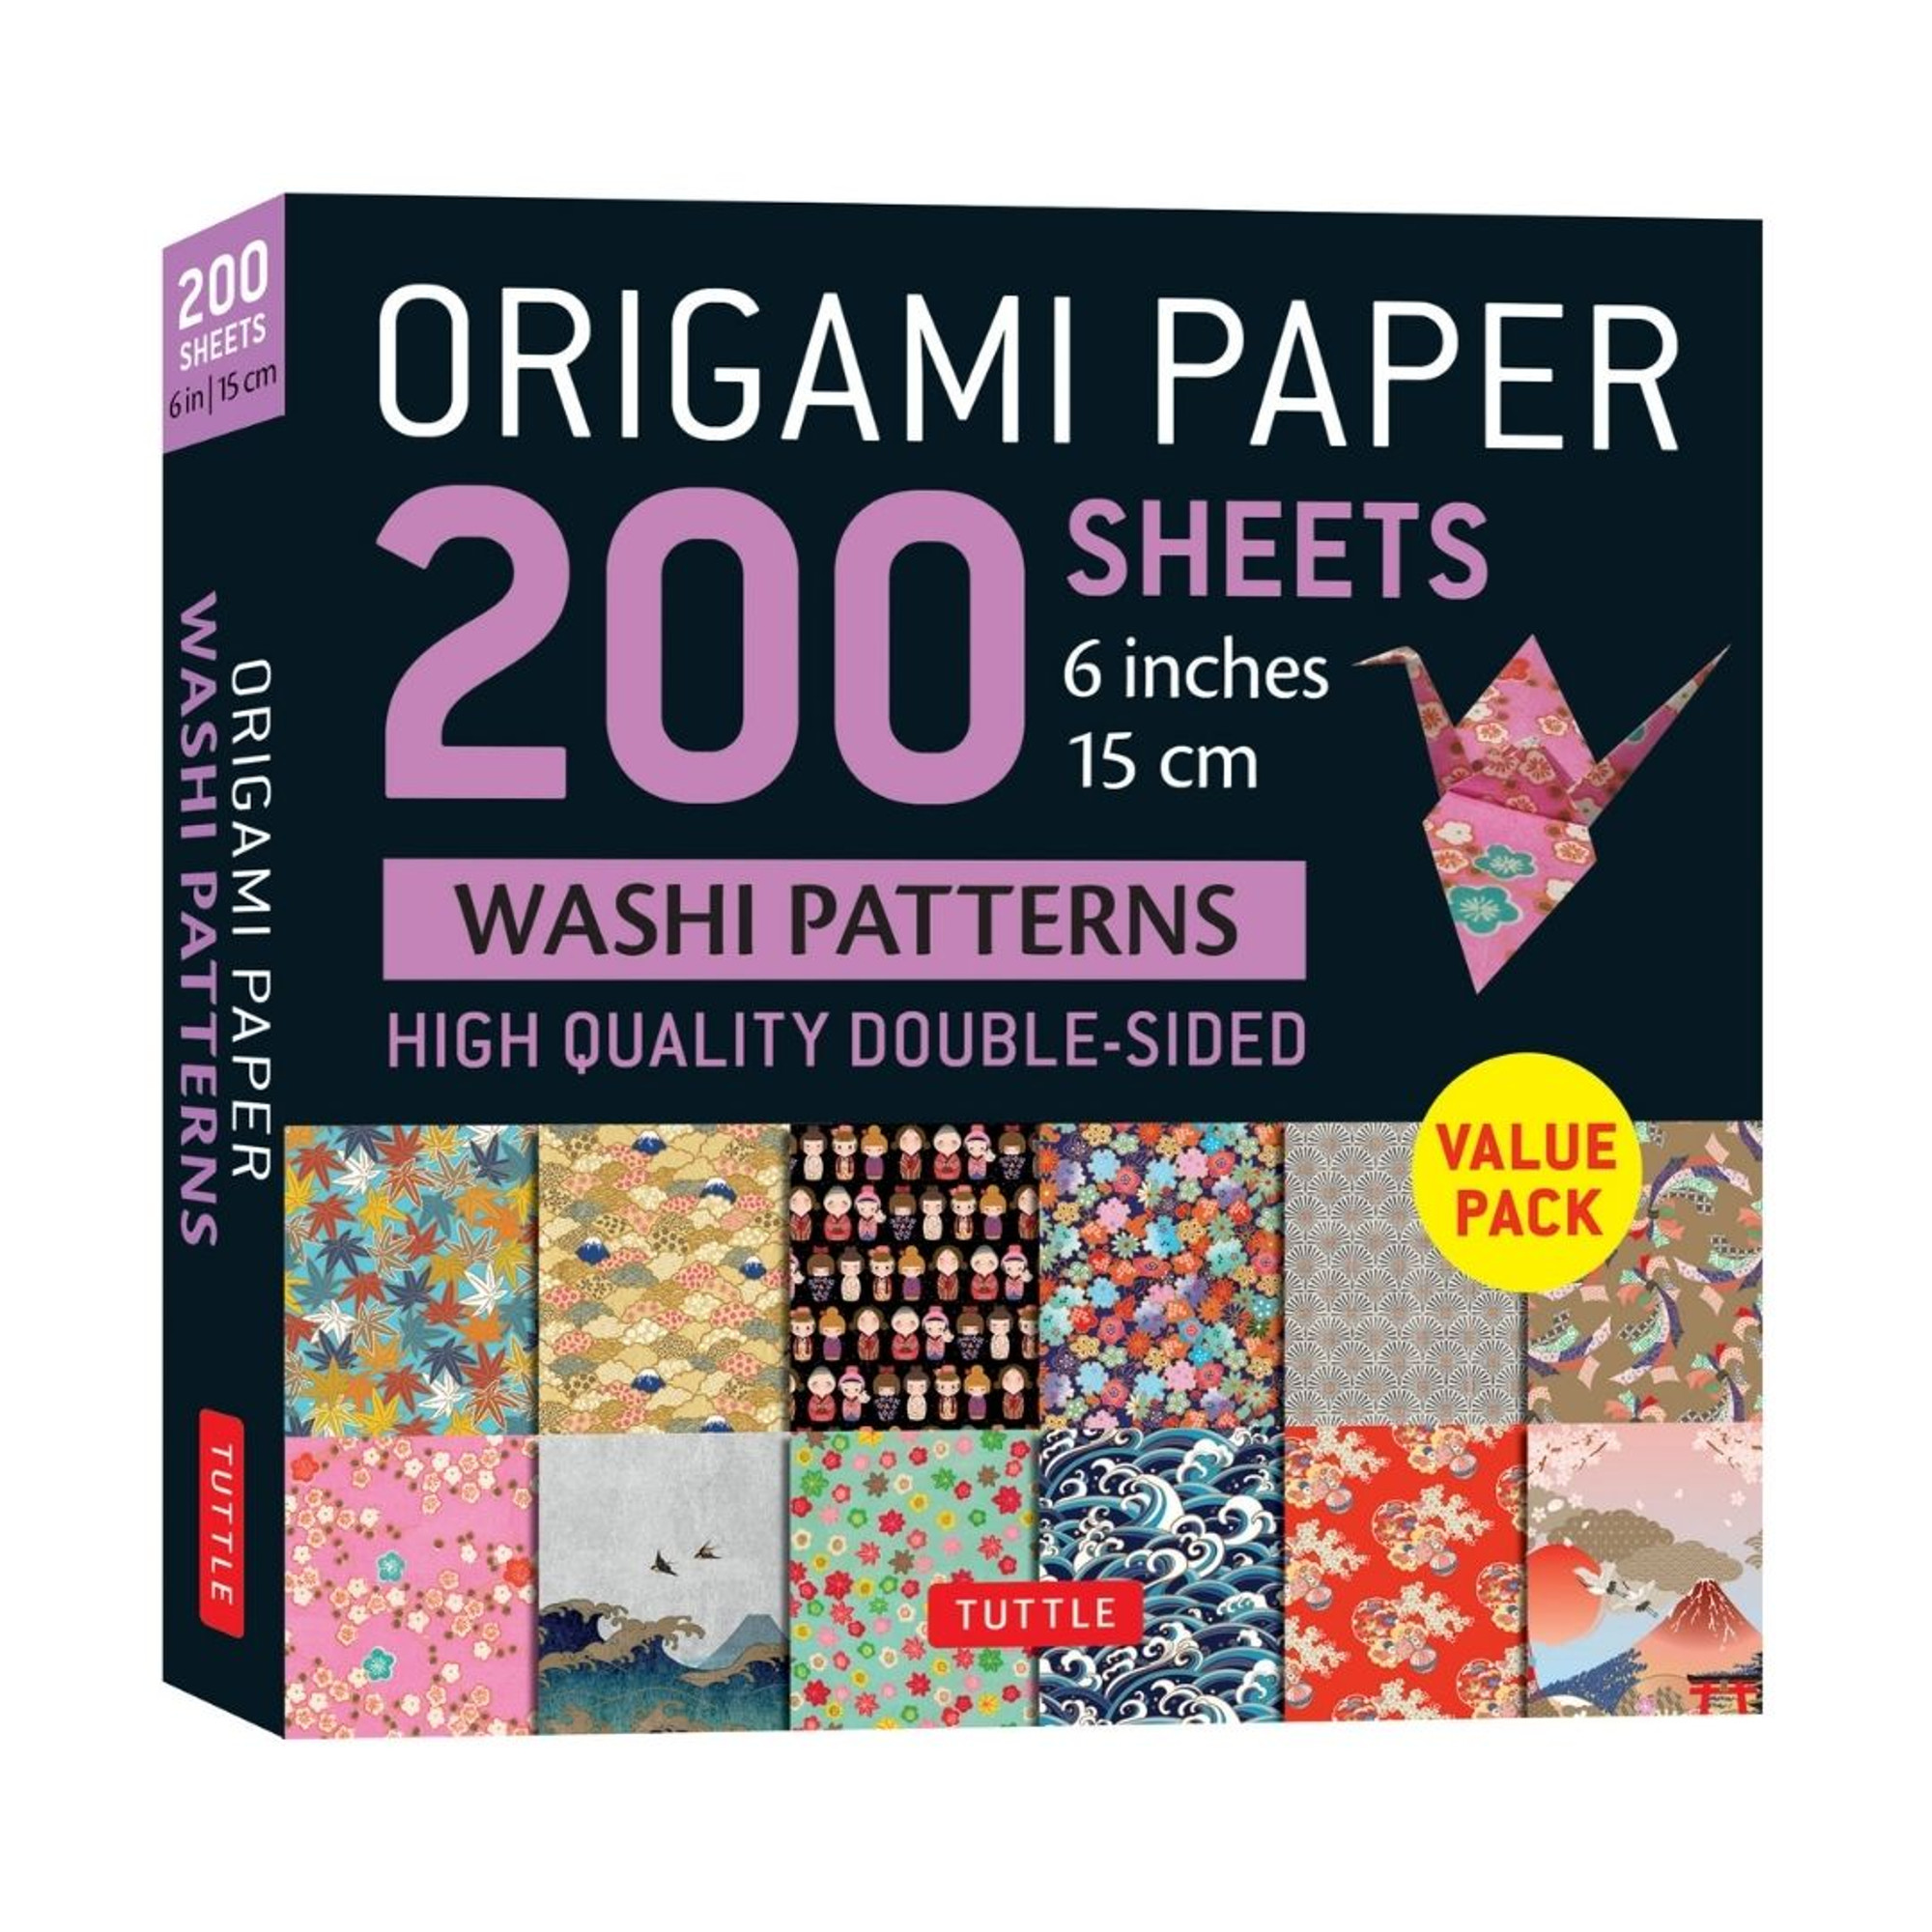 Origami Paper in a Box - Japanese Washi Patterns (9780804857291)